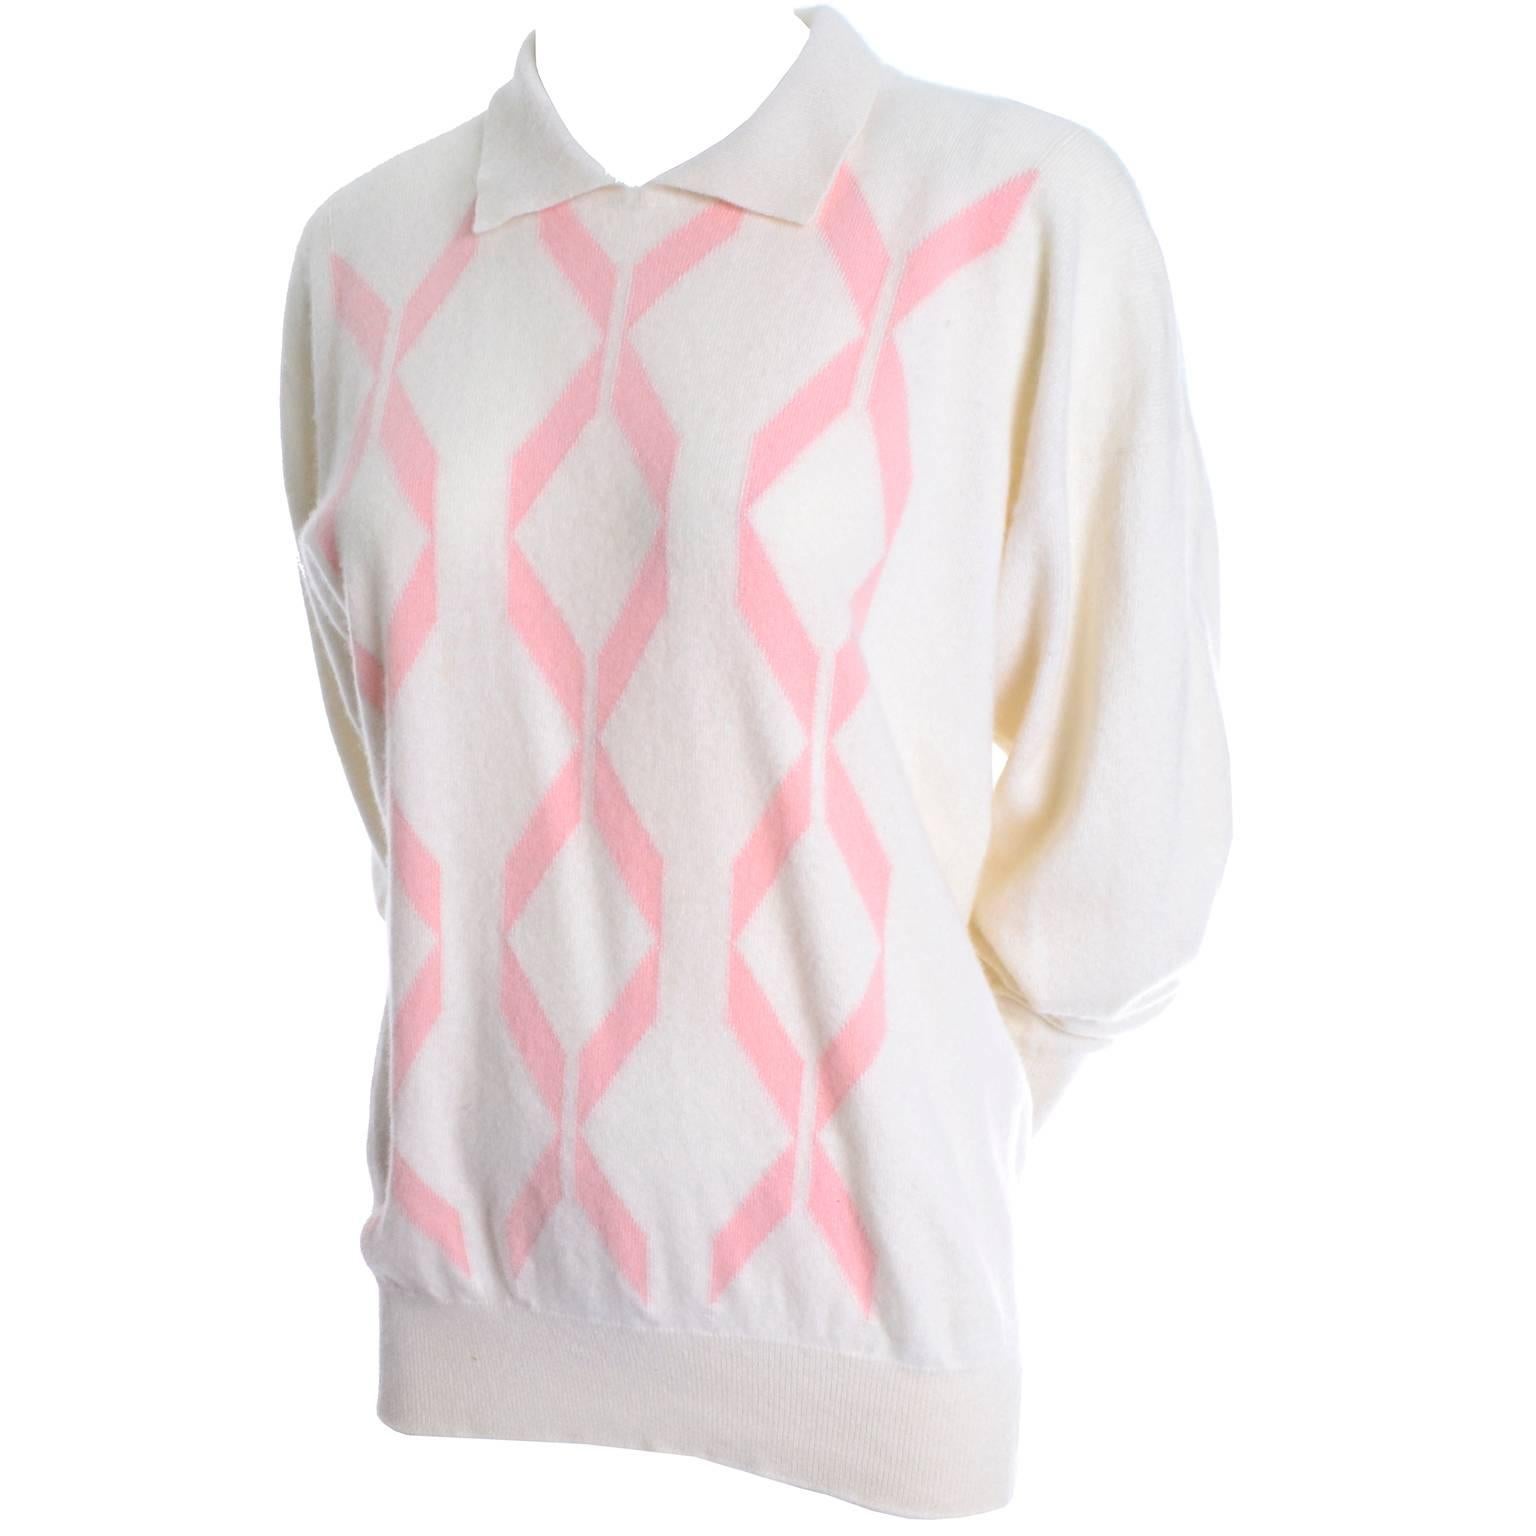 This beautiful vintage cashmere sweater was made in Scotland by Pringle and it is in excellent condition.  The winter white cashmere has a pink ribbon design and the cashmere is so luxurious and soft. This sweater has a collar and long sleeves, and